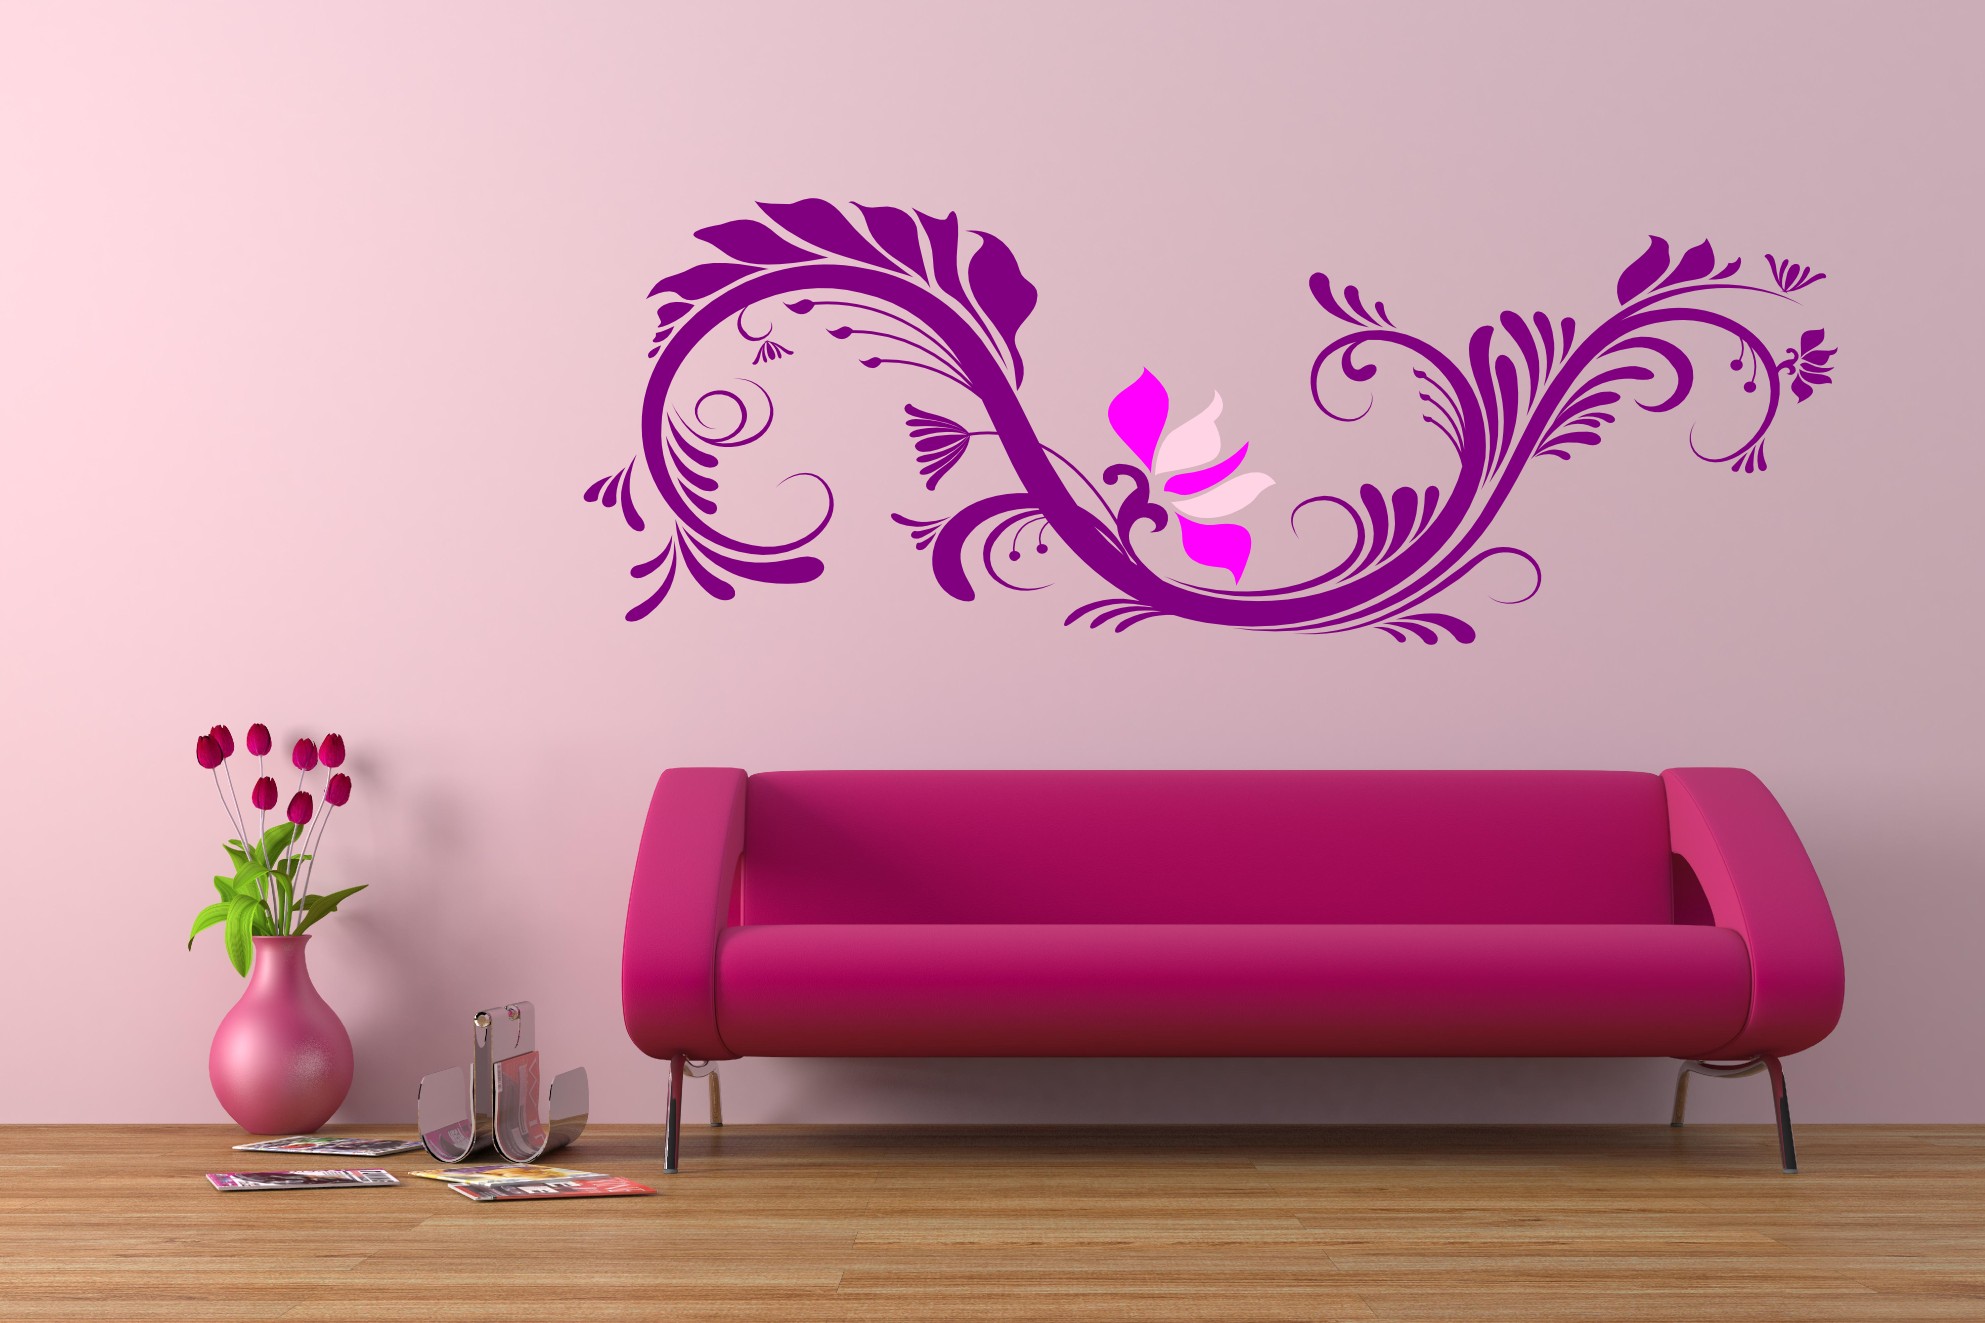 Modern and Stylish pink Wall Decoration in Living Room Display - Wall